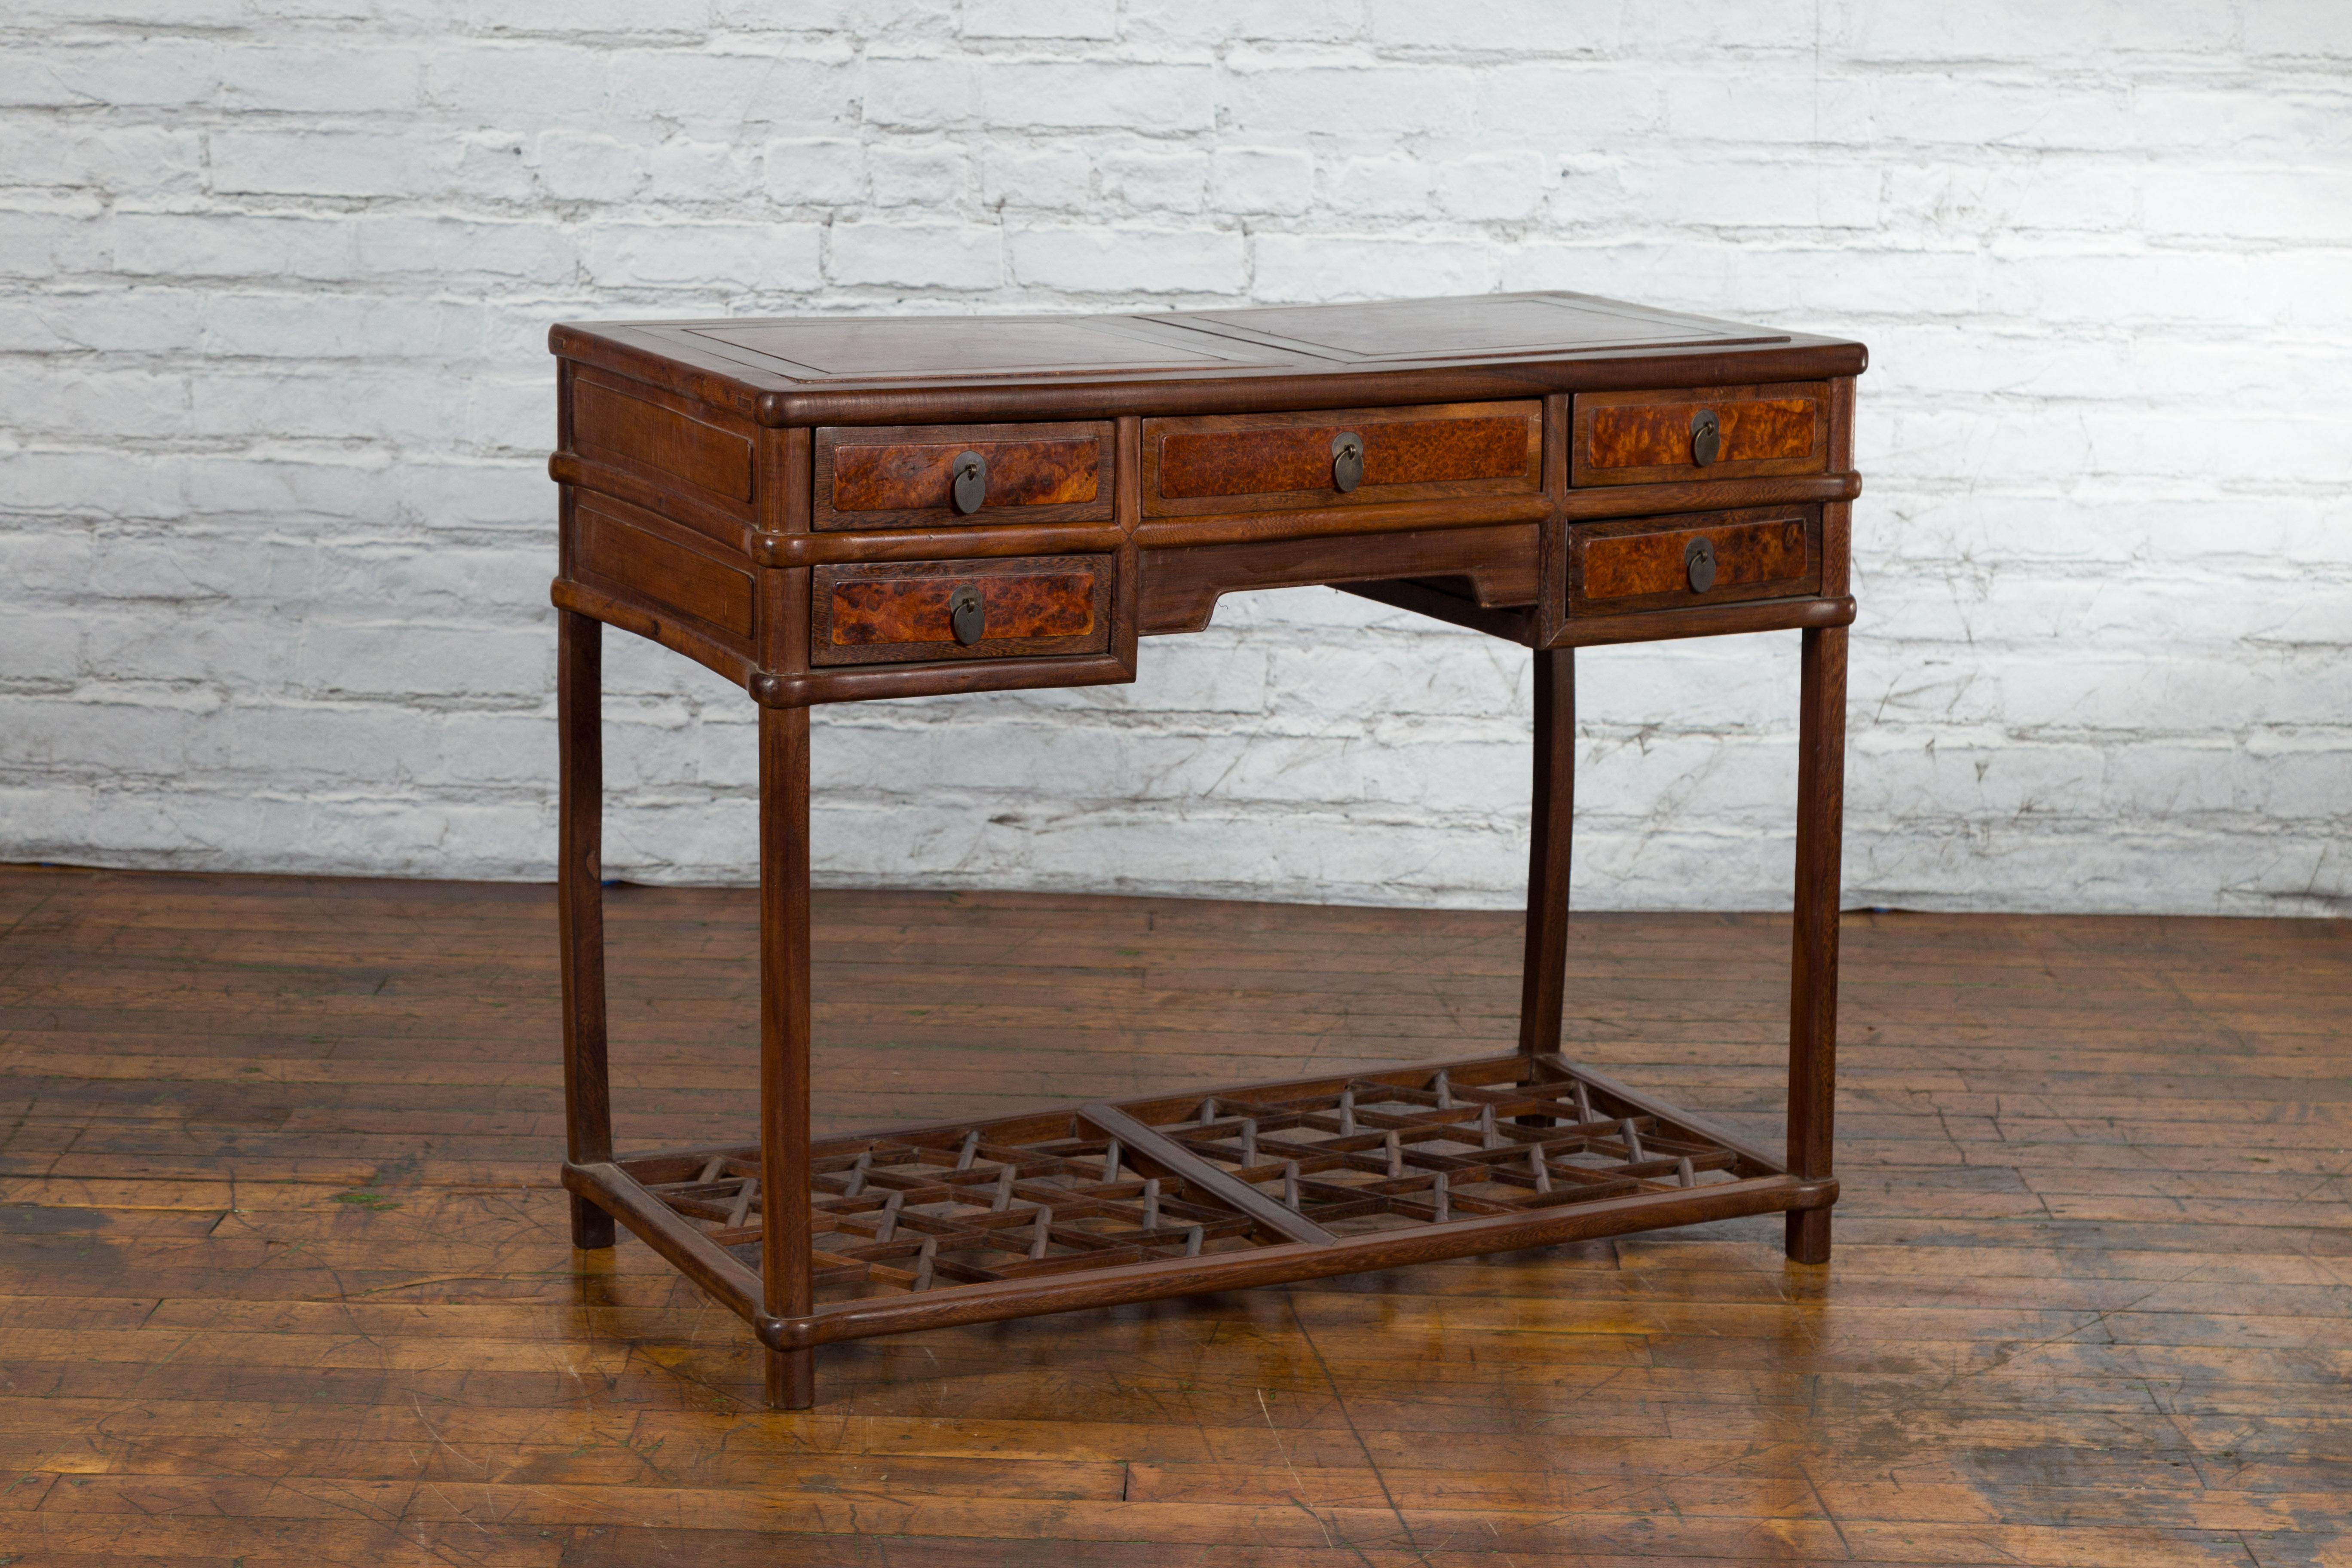 Qing Dynasty 19th Century Desk with Burlwood Top, Drawers and Cracked Ice Shelf For Sale 3